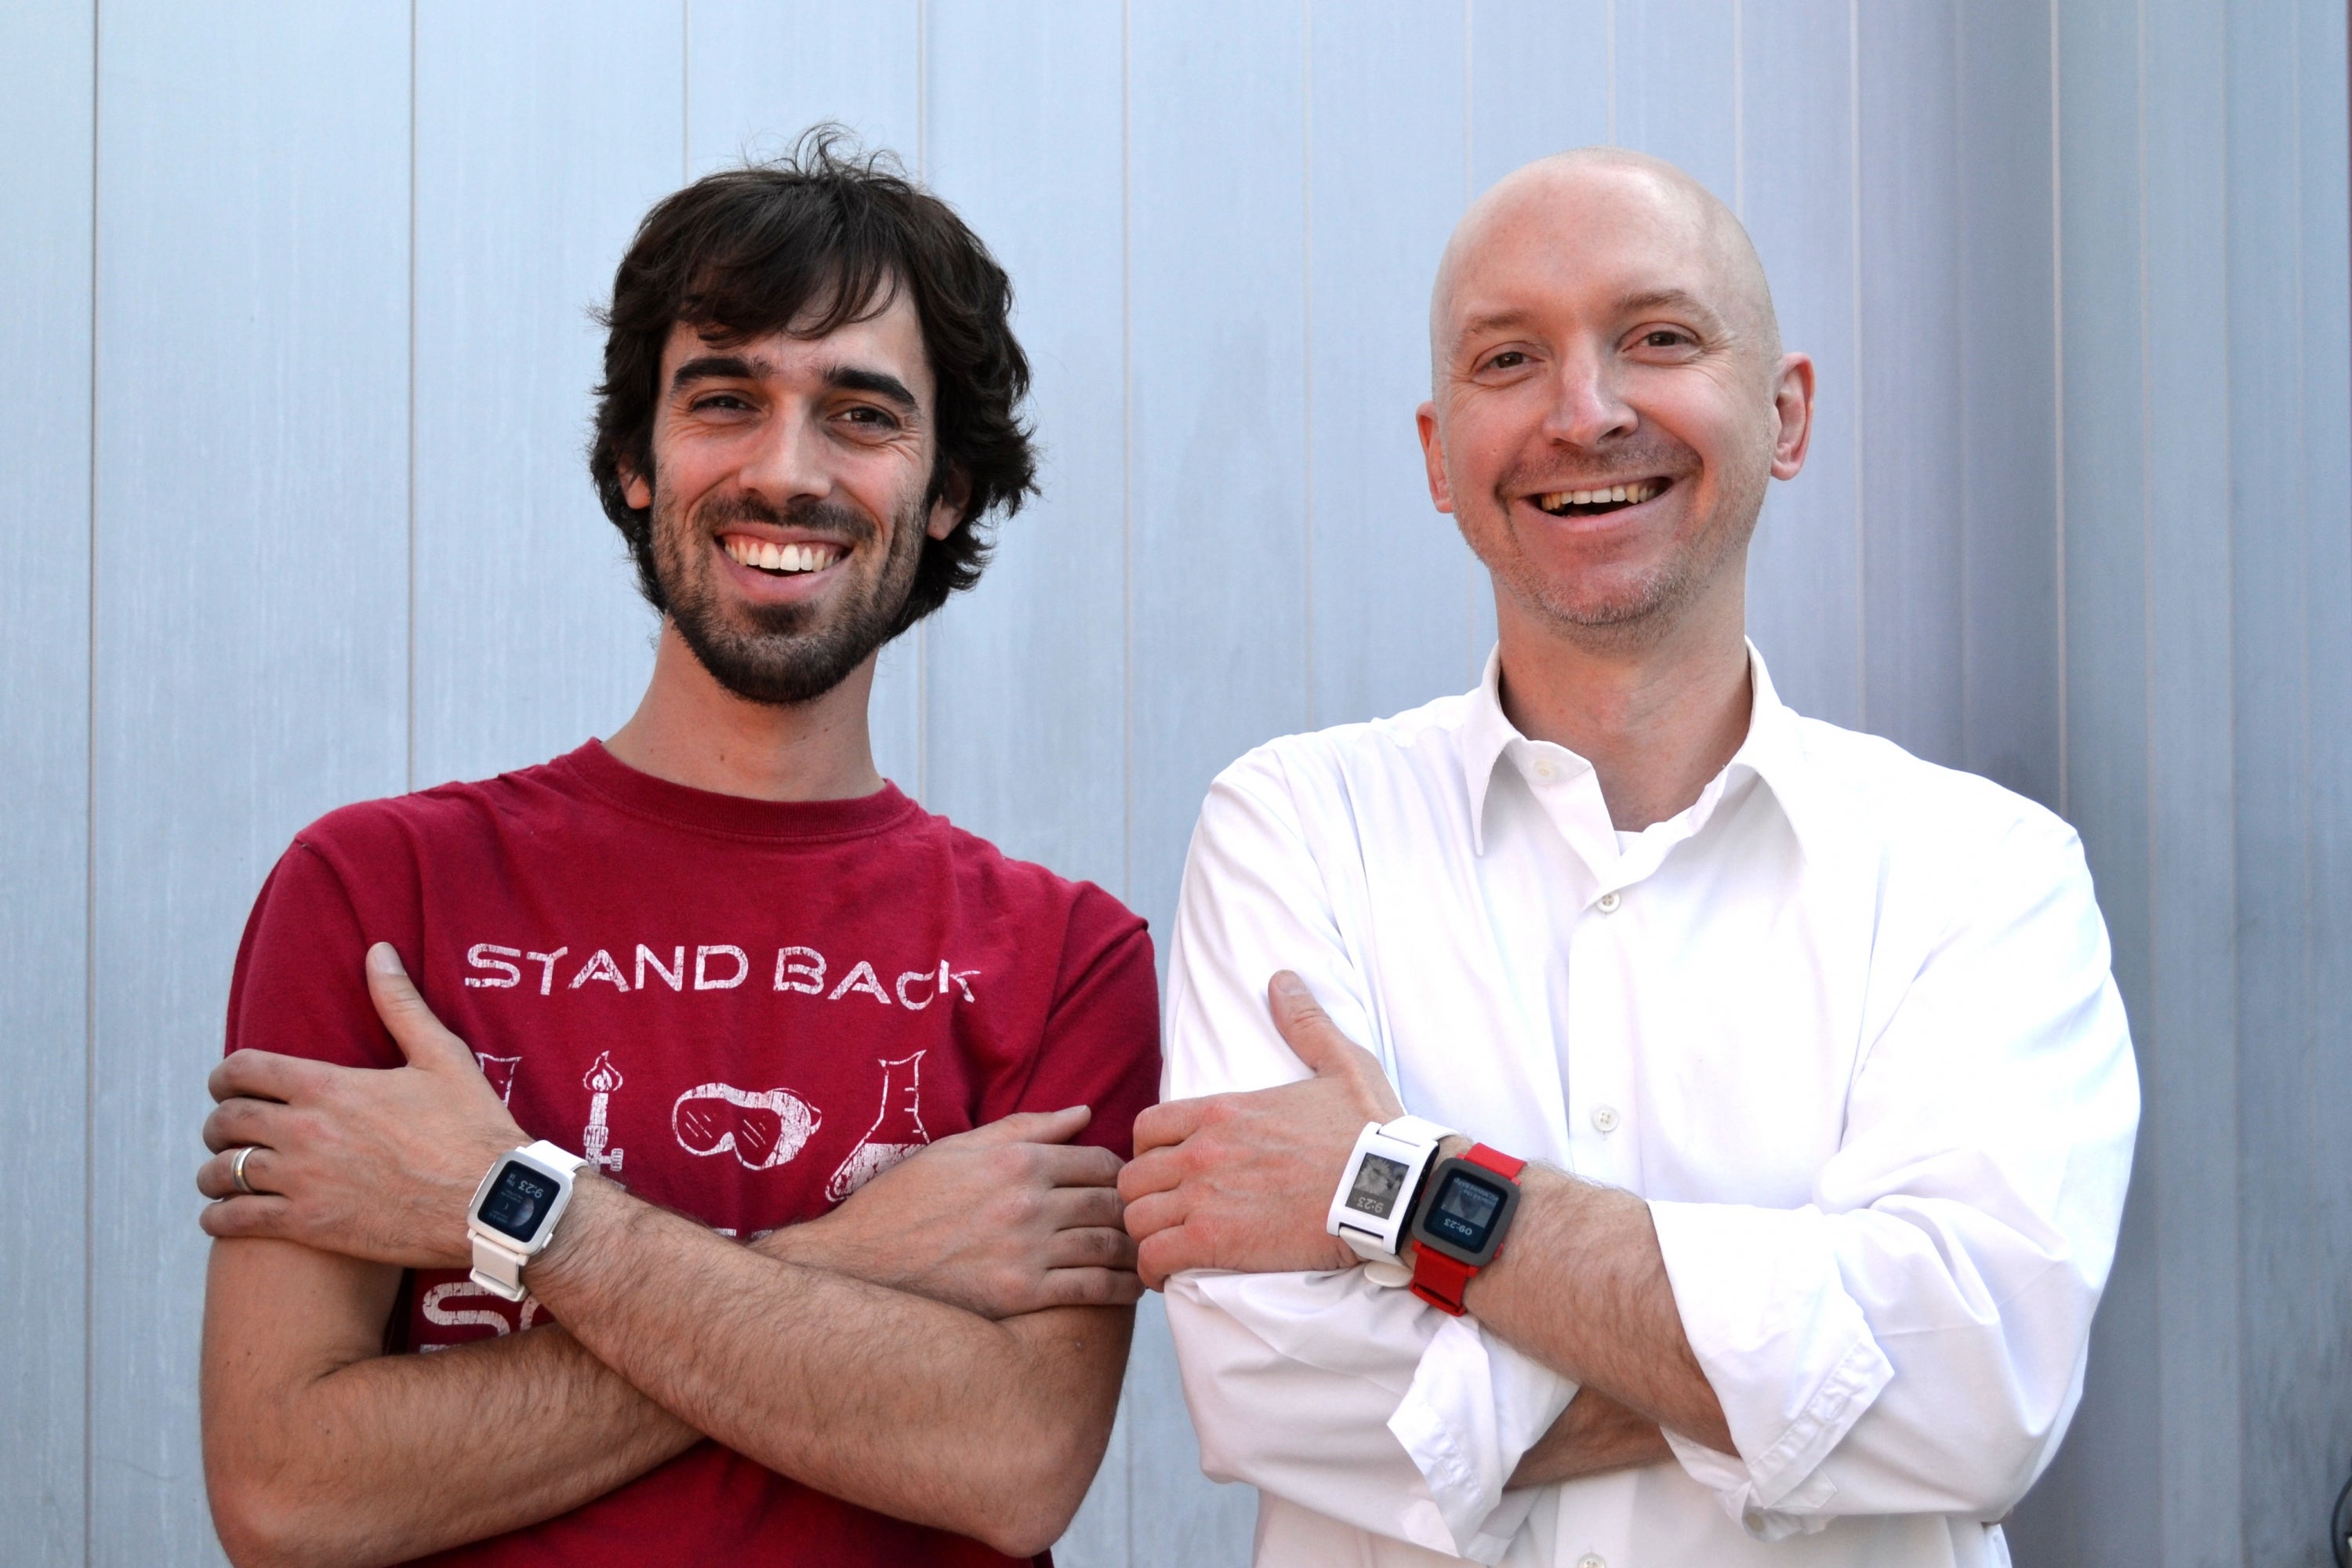 Michael Terry and Adam Fourney with Pebble smartwatches on wrists